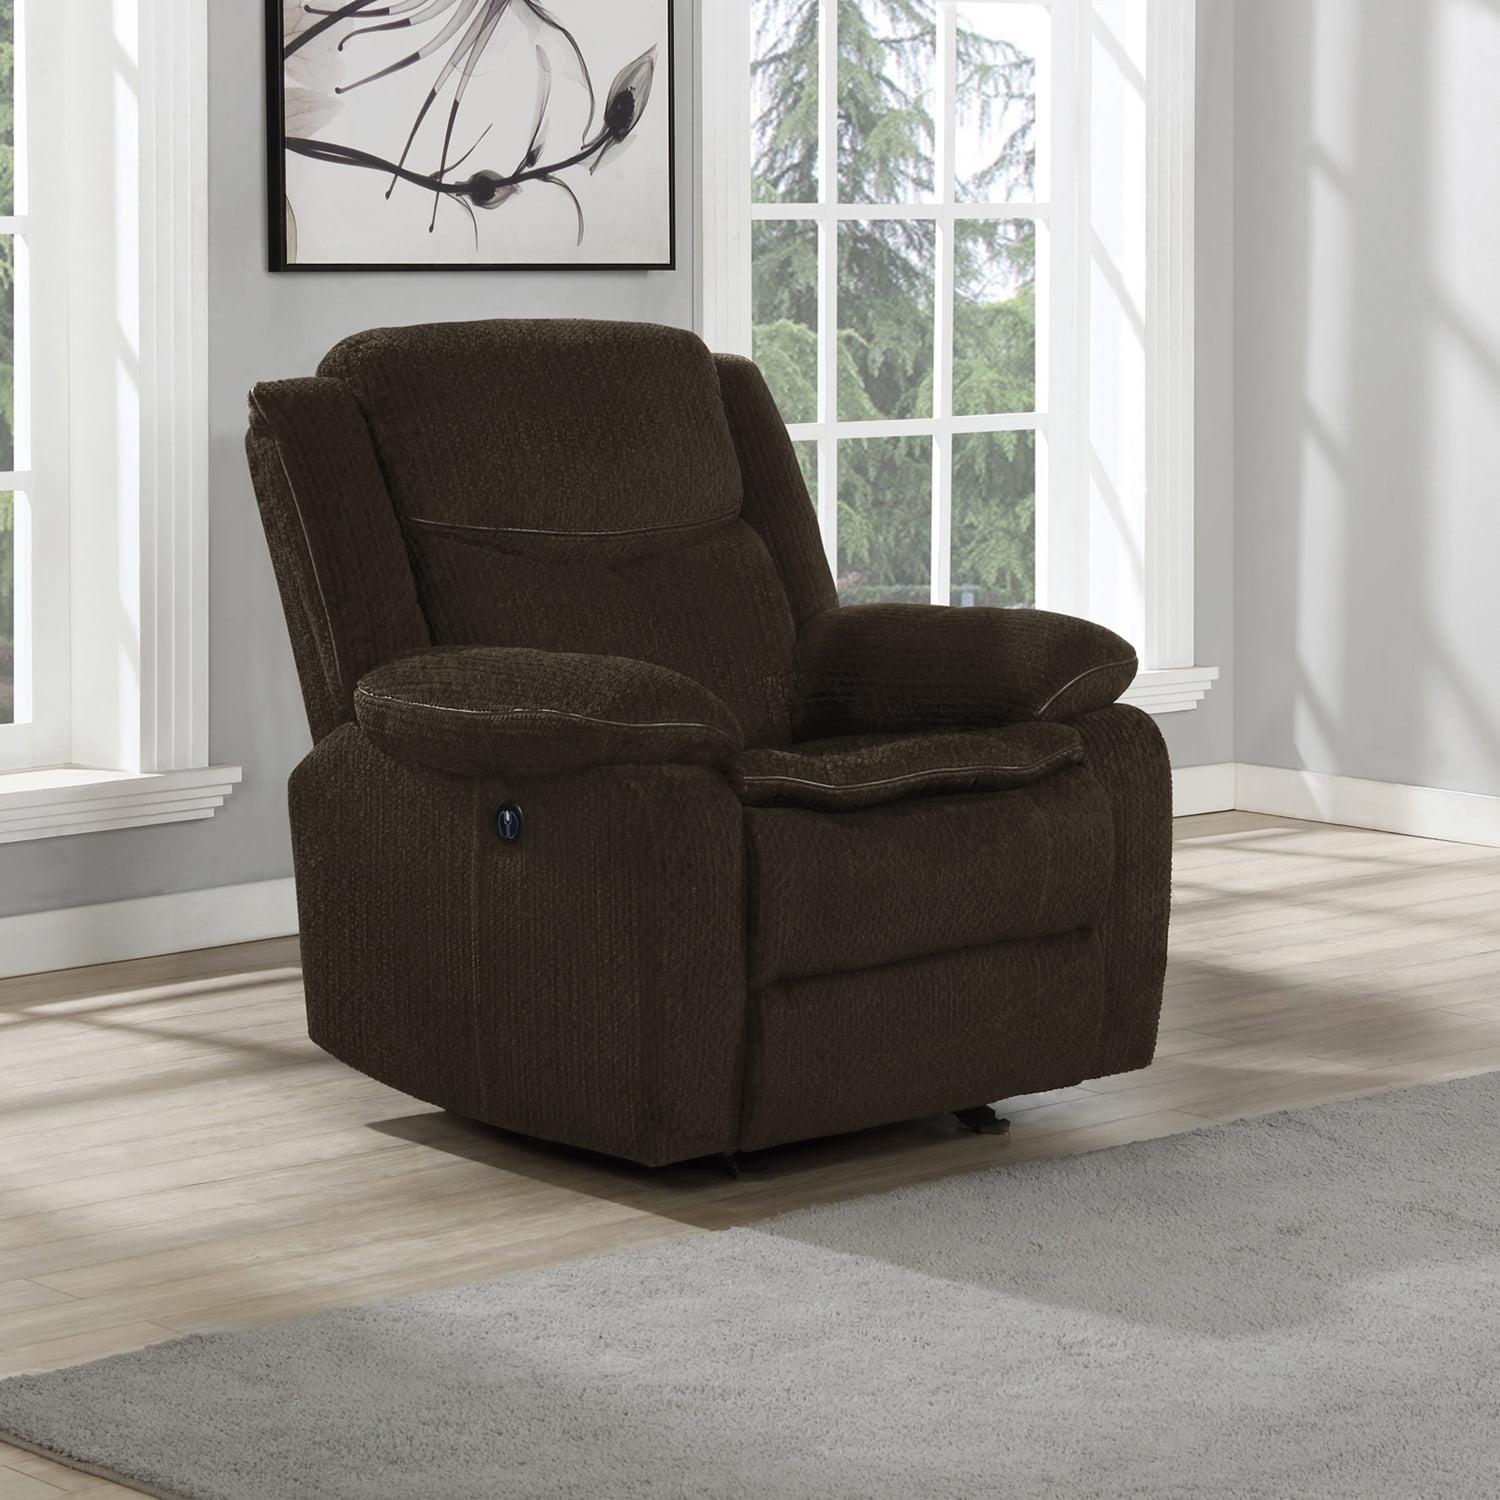 Modern Brown Faux Leather Glider Recliner with Memory Foam